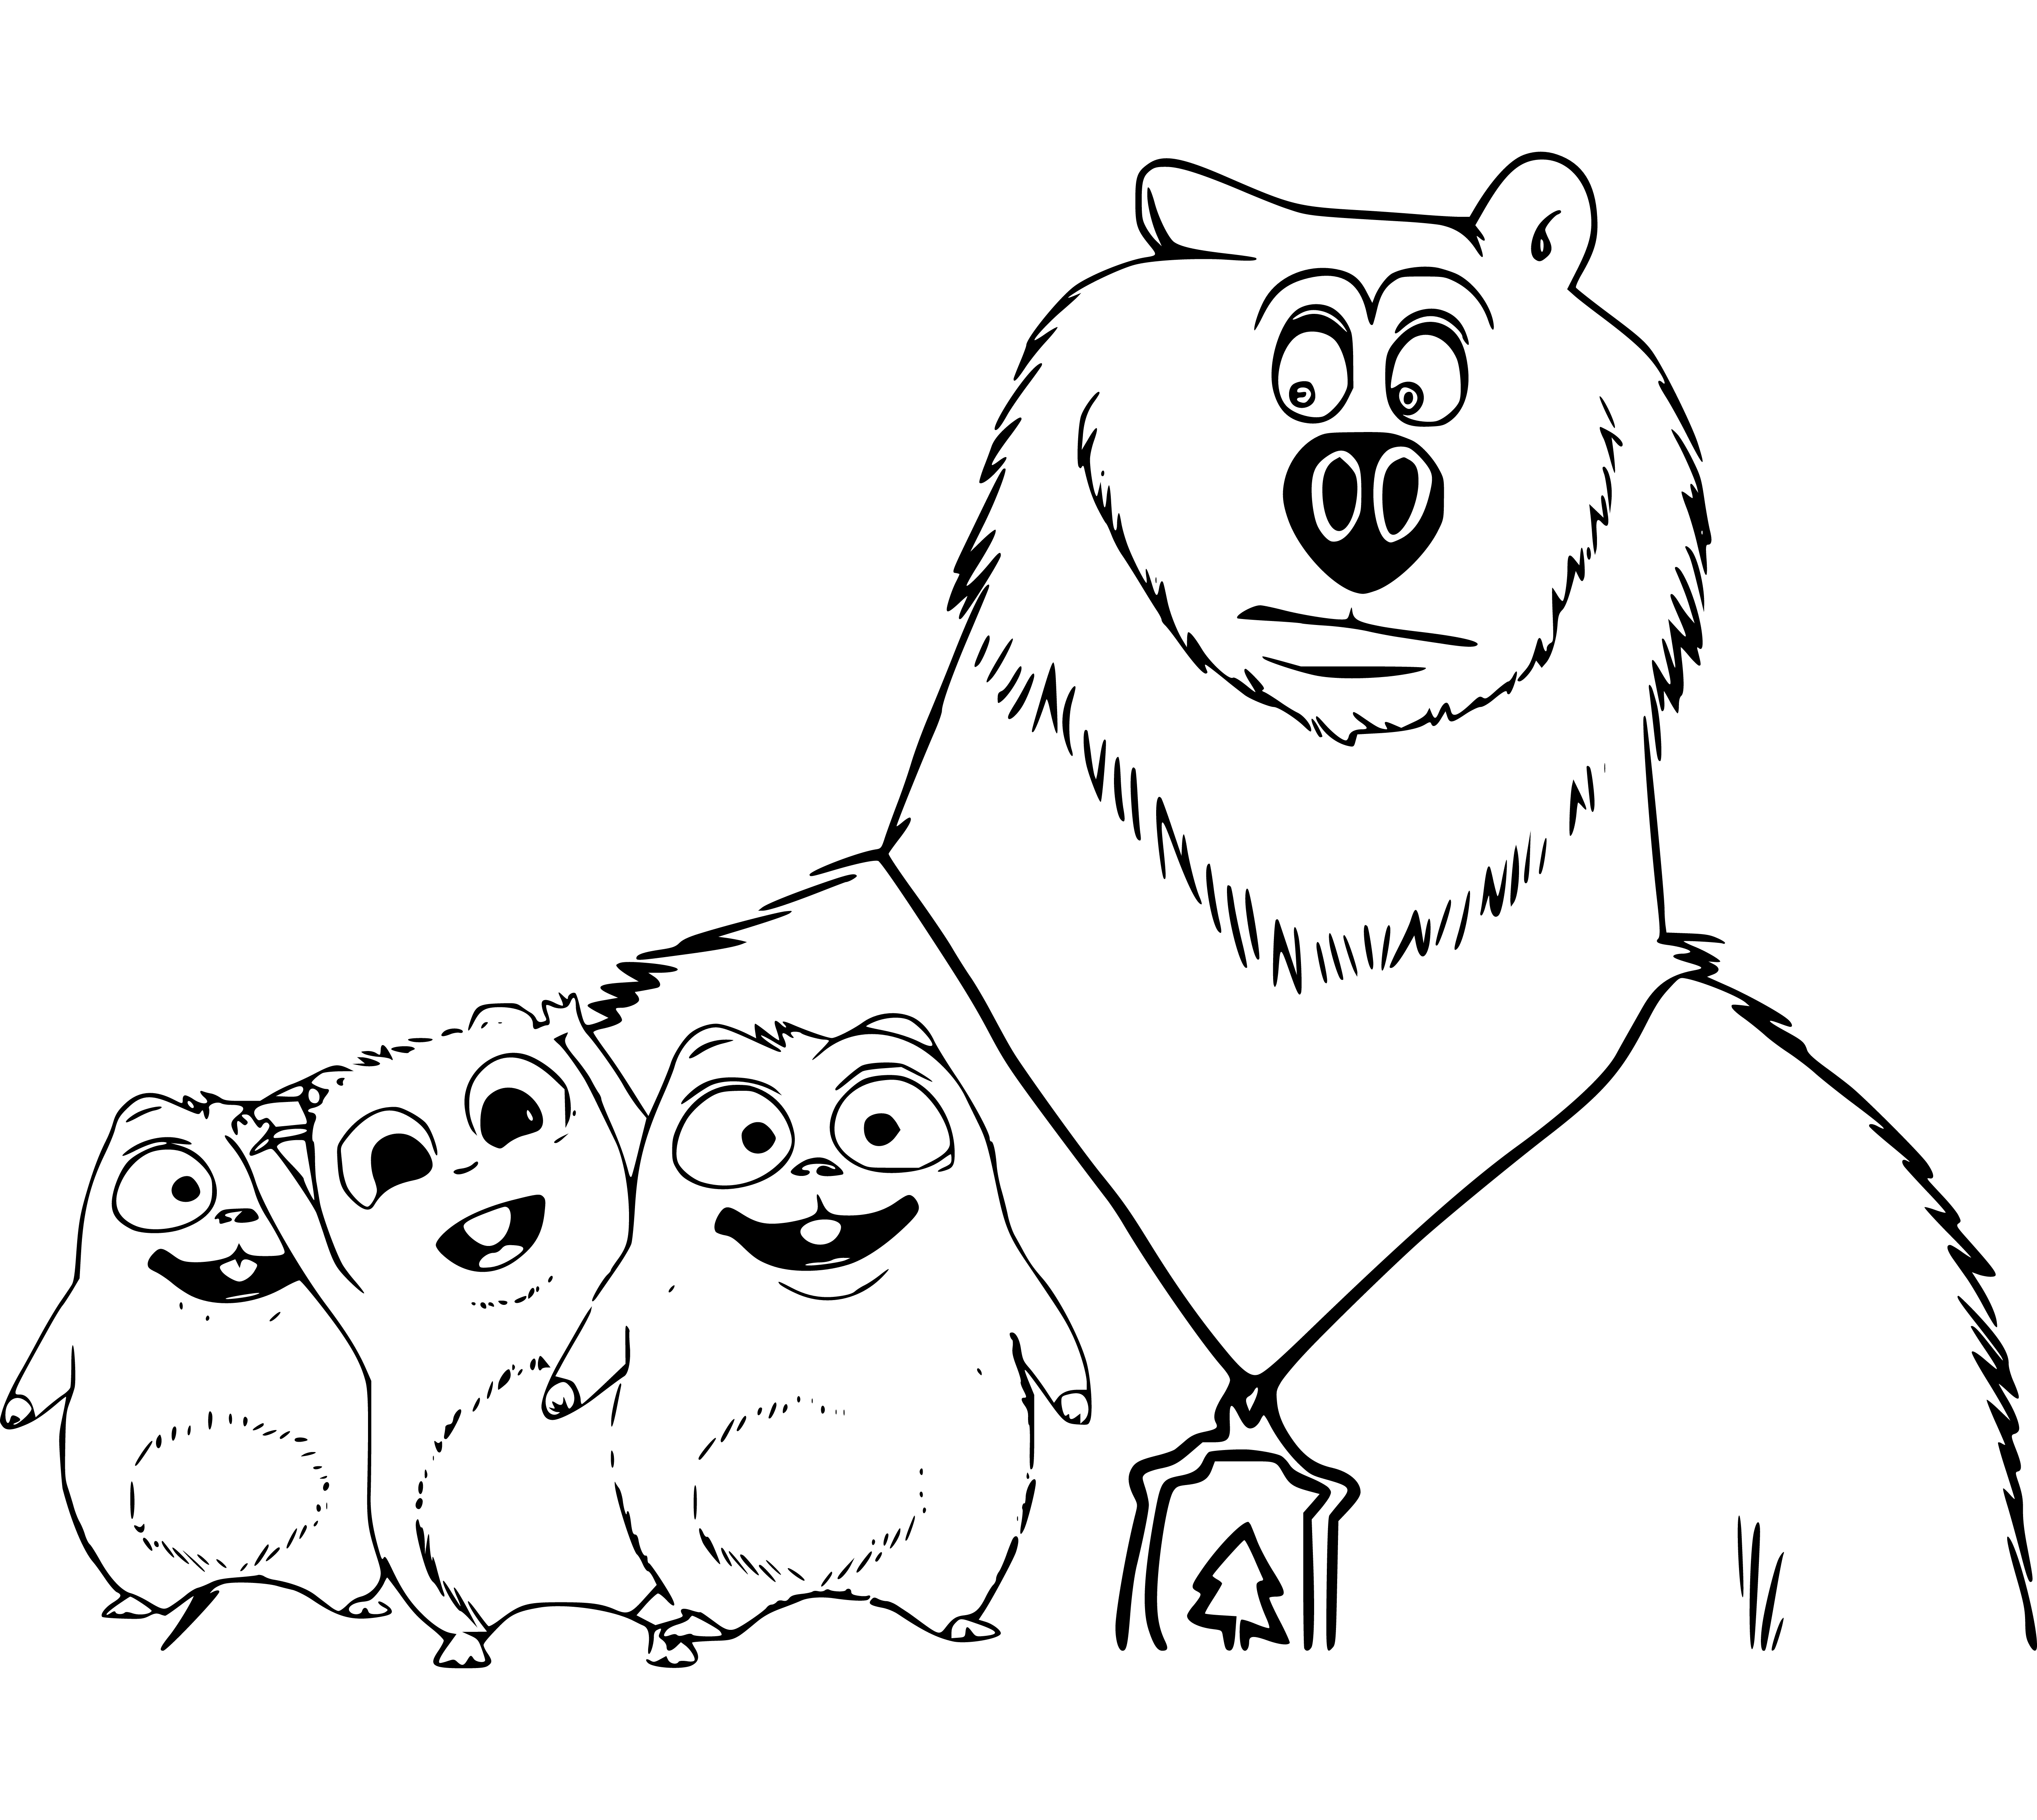 Grizzy and the Lemmings Coloring Page 4 Kids to Print - SheetalColor.com